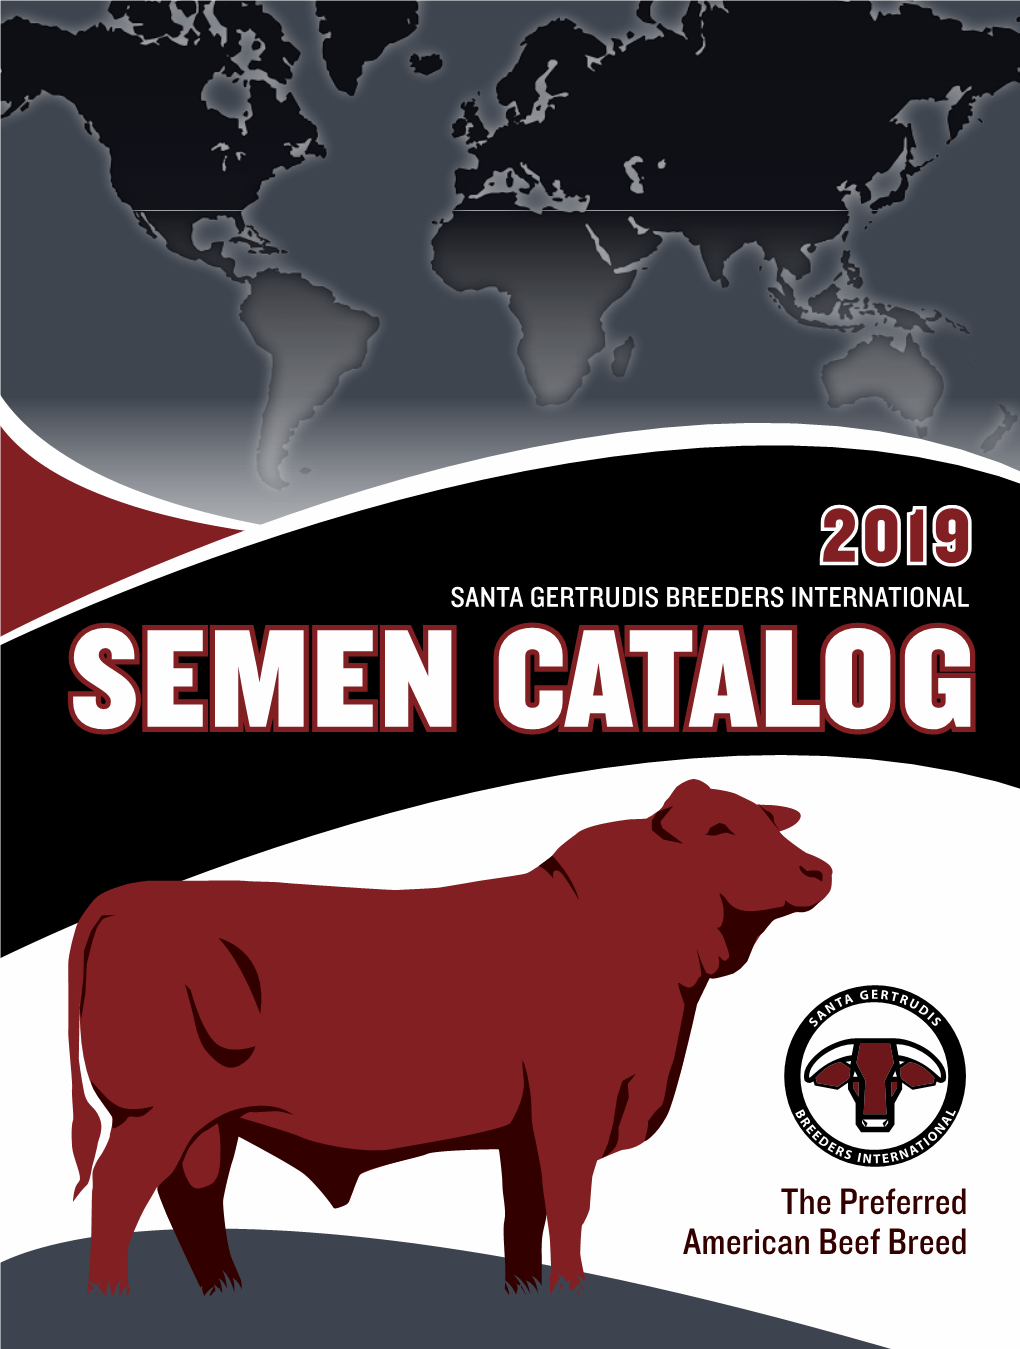 2019 SGBI Semen Catalog Offers Some of the Breed’S Top Performing Individuals – Bulls Capable of Improving Maternal and Carcass Traits